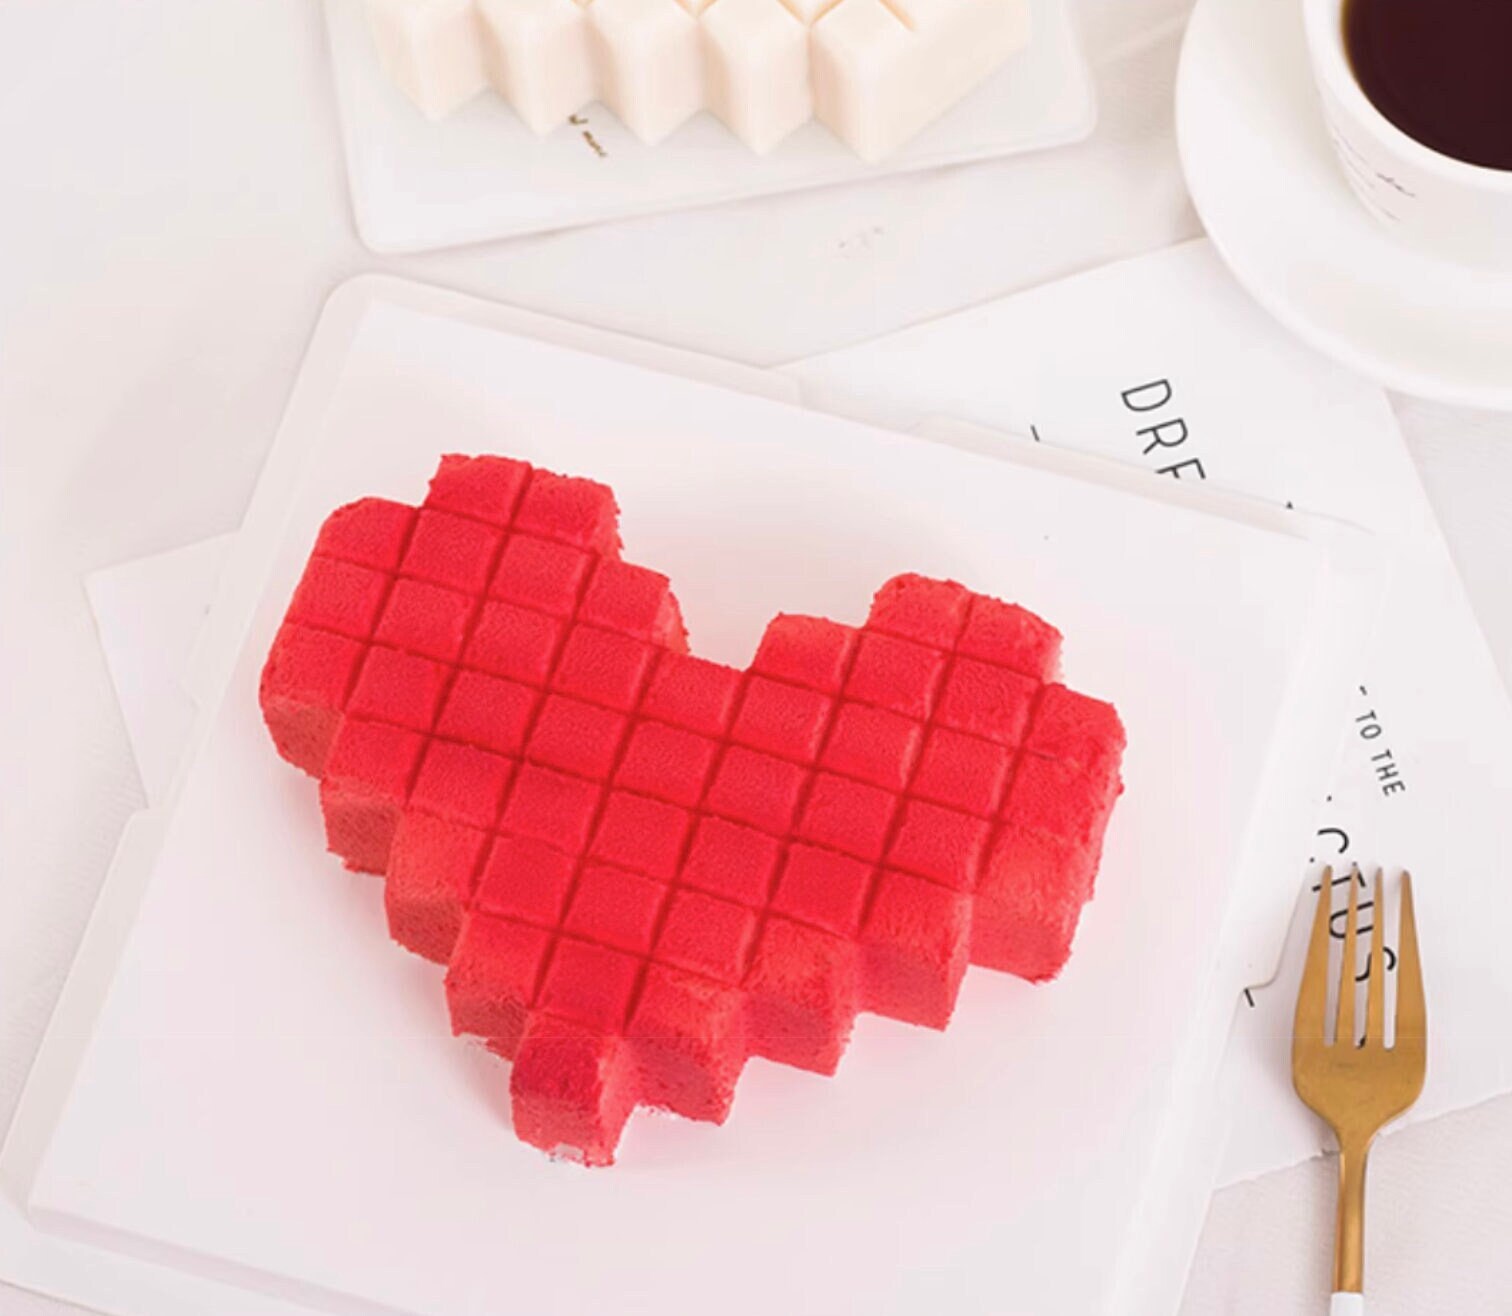 New Mousse Cake Mould 8 Holes Heart Silicone Molds for Cakes Mousse French  Dessert Mold Pastry Baking Tools 